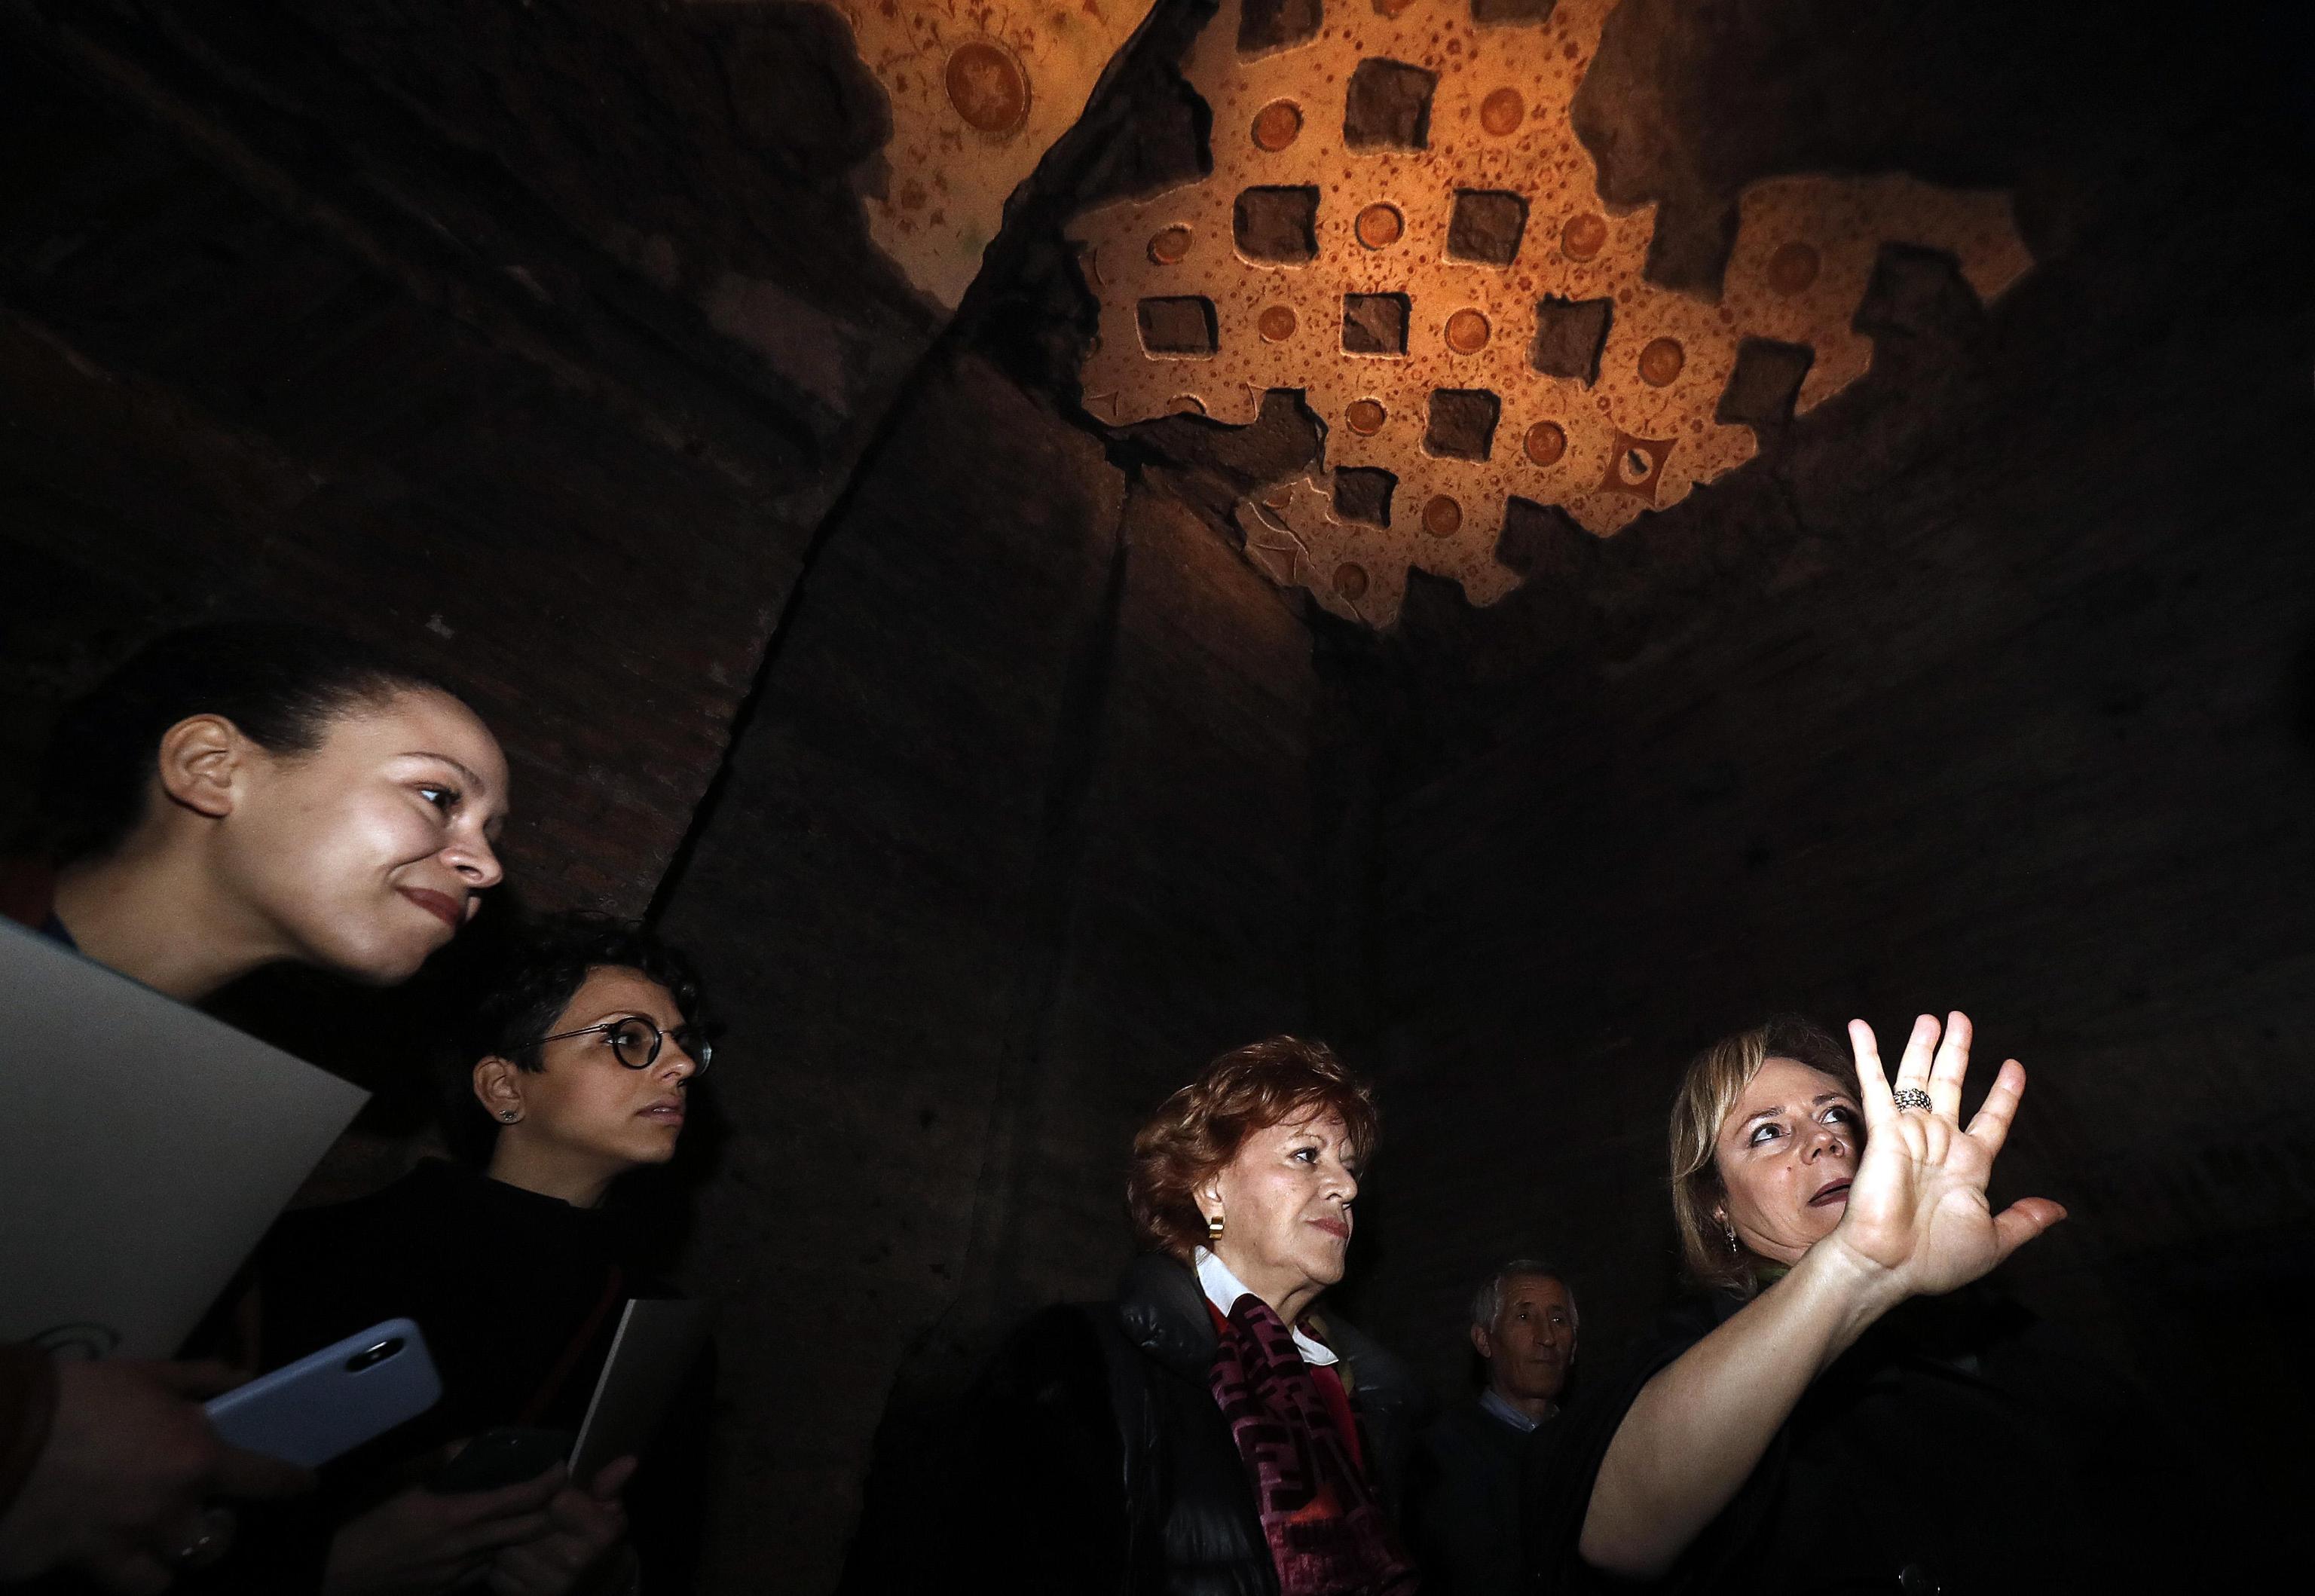 Alfonsina Russo (L), director of the Colosseum Archeological Park, during the presentation of the 'Domus Transitoria', the first Nero's palace on the Palatine Hill, Colosseum Archeological Park, Rome, Italy, 11 April 2019. ANSA/RICCARDO ANTIMIANI